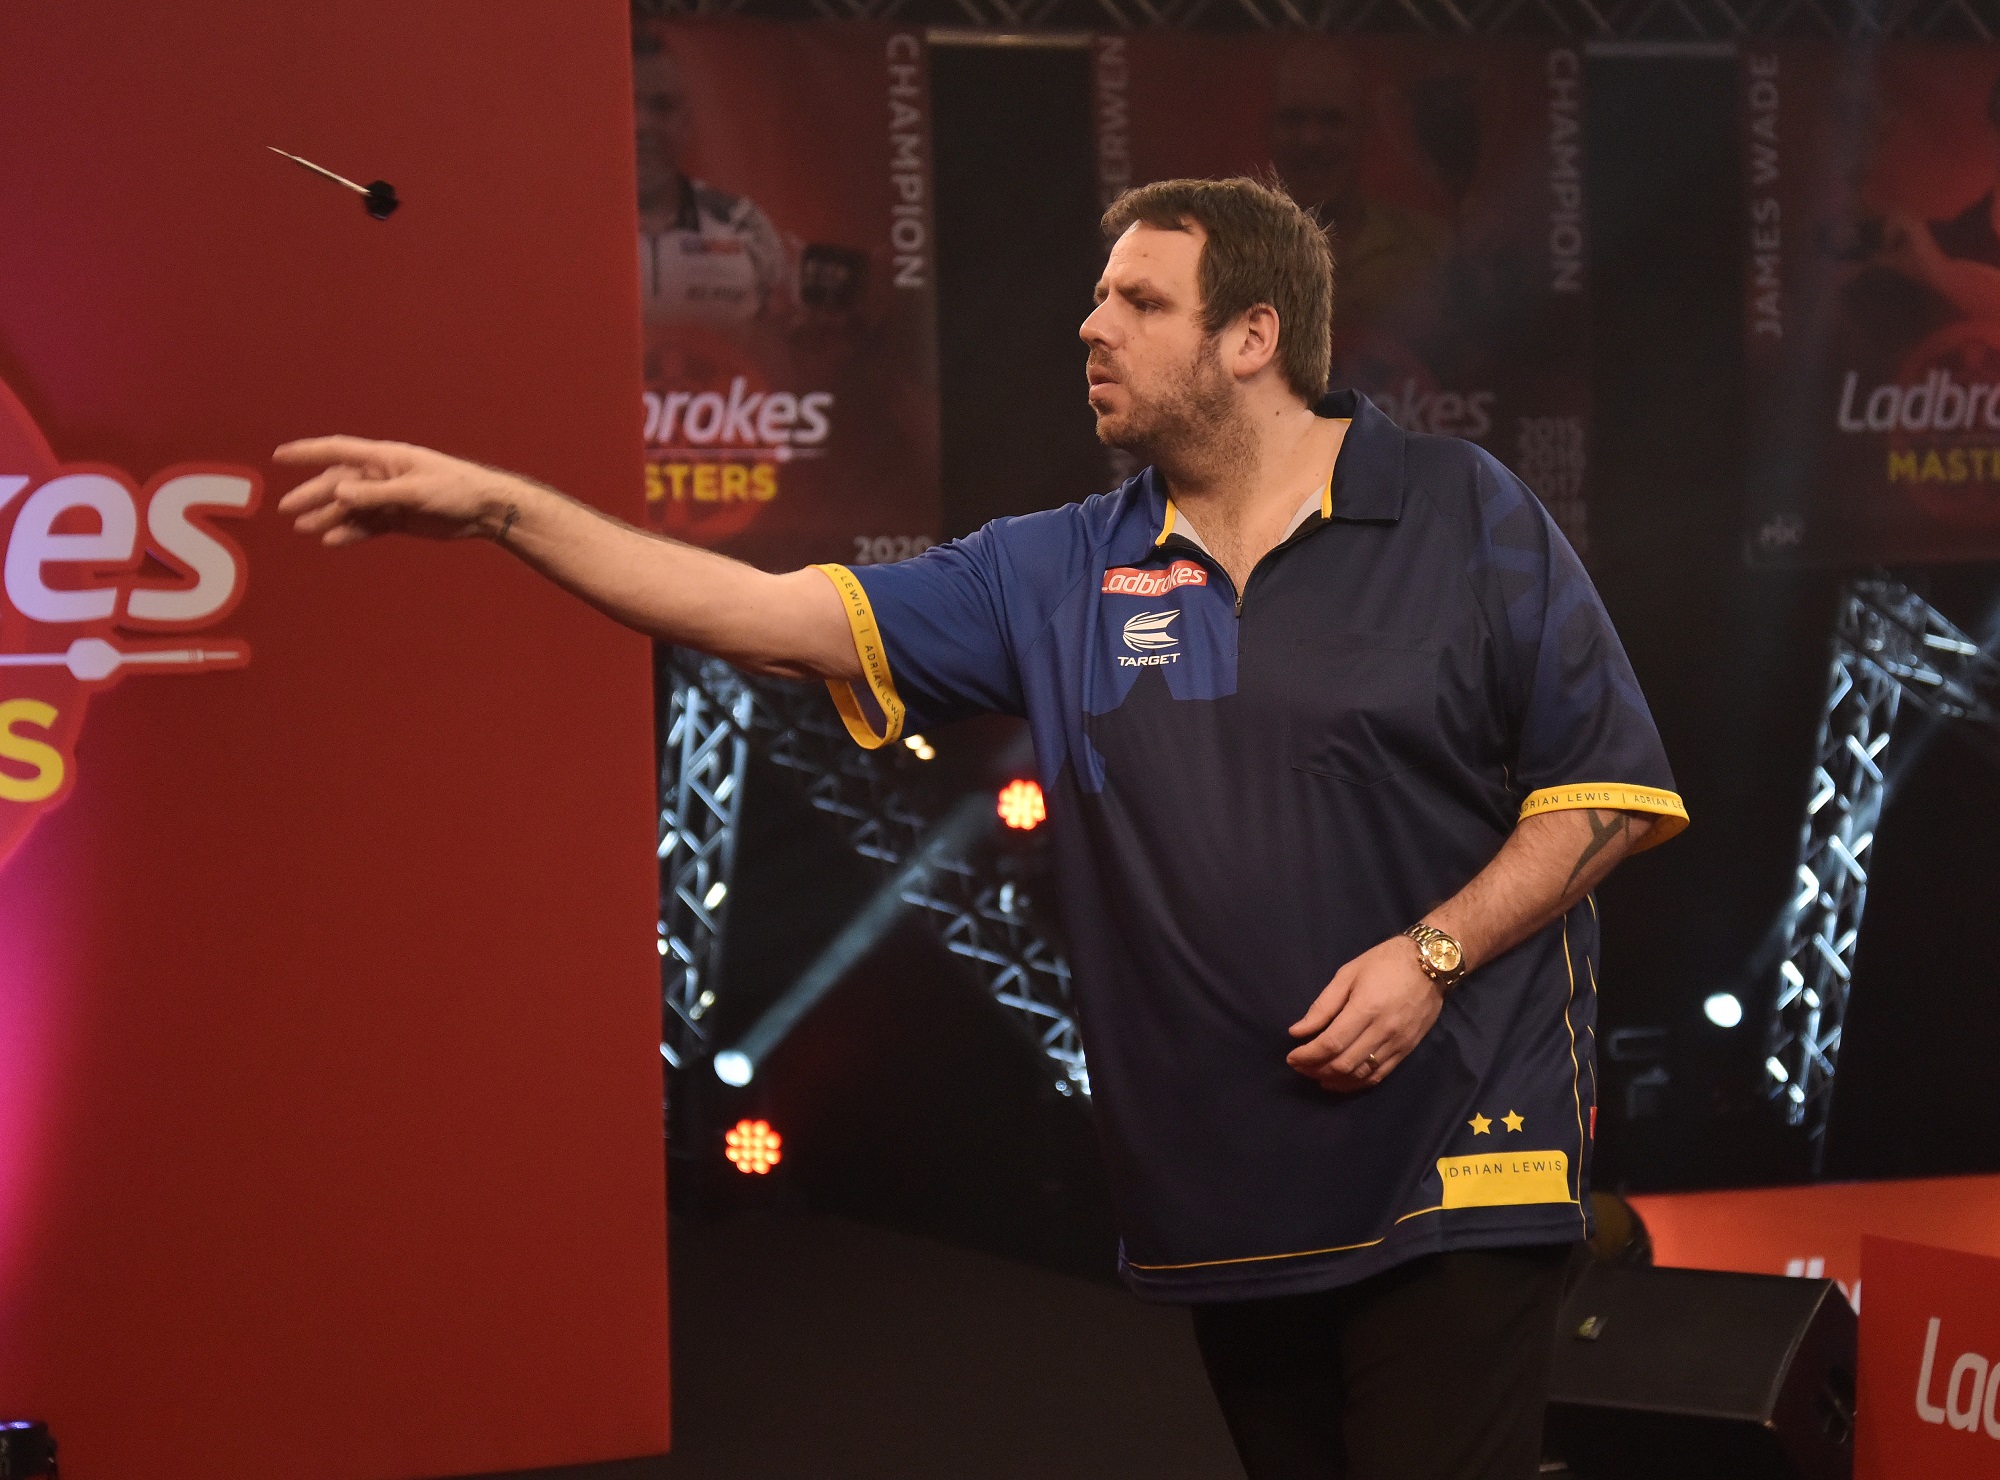 Adrian Lewis on COVID struggles: “I still couldn’t run up a set of stairs without being out of breath